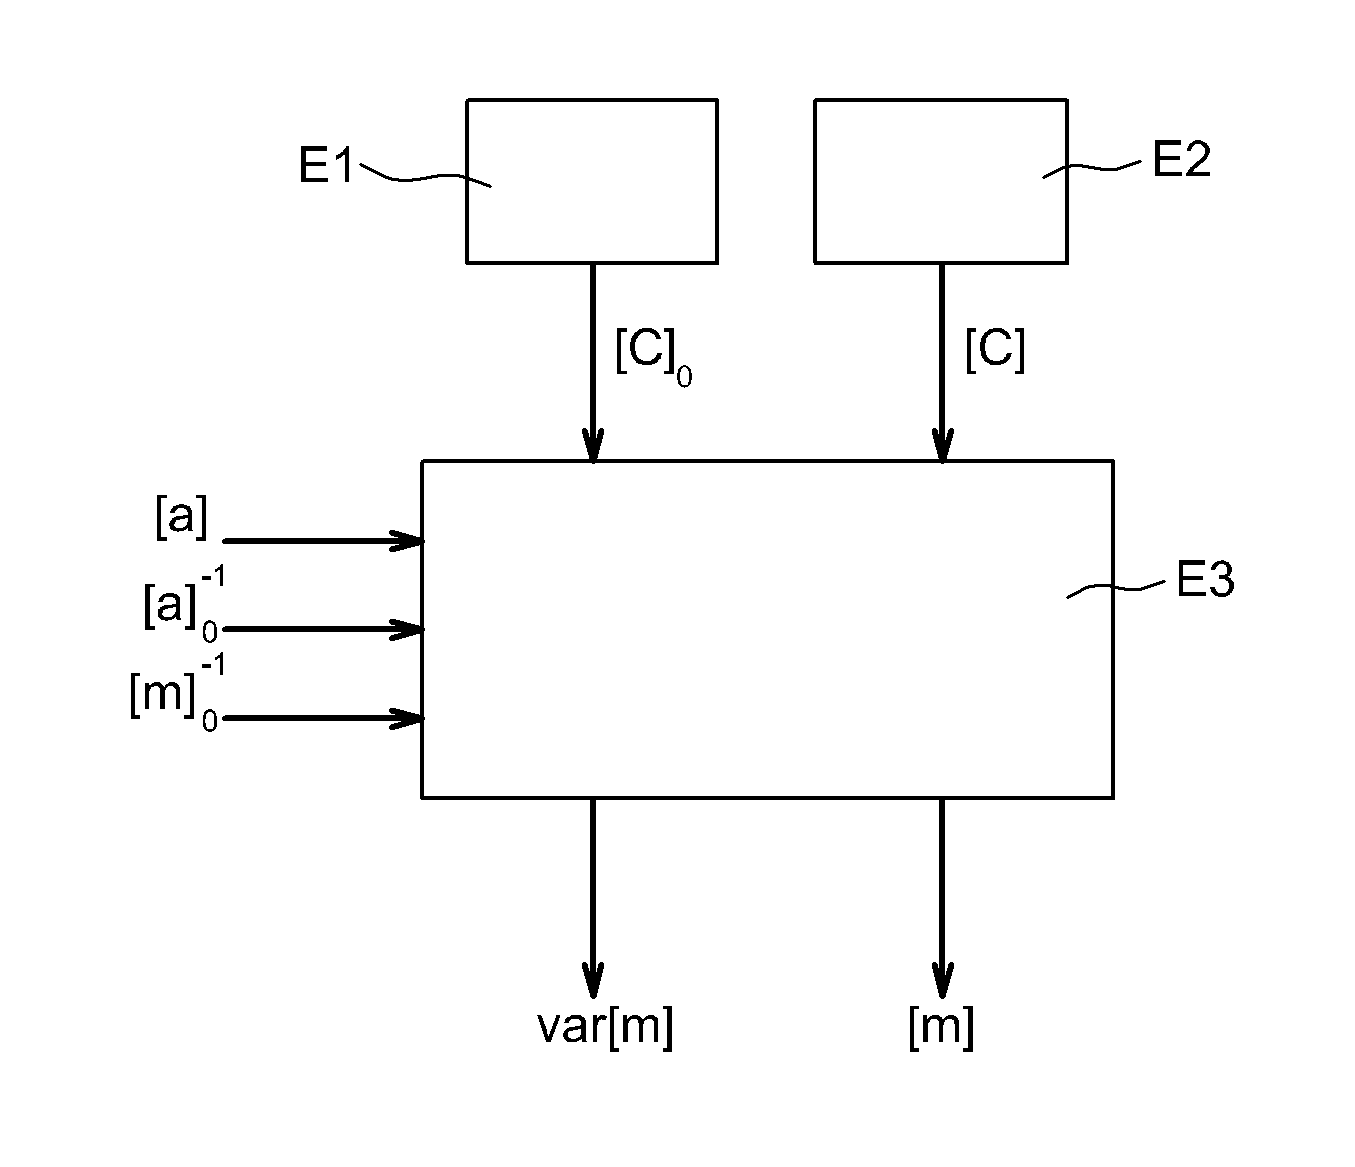 Method to process fission chamber measurement signals